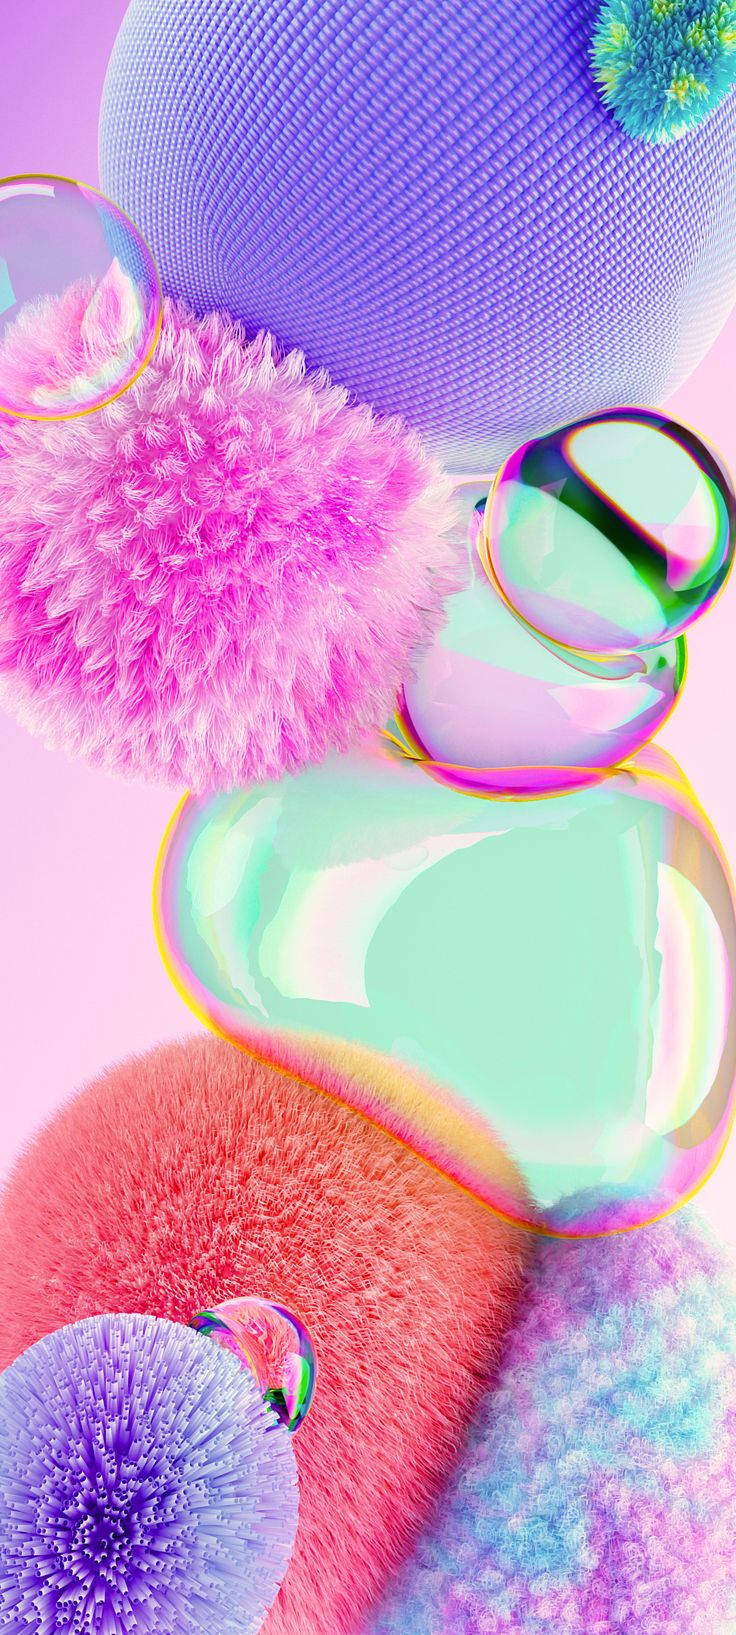 Fluffy Balls And Bubbles Mobile 3d